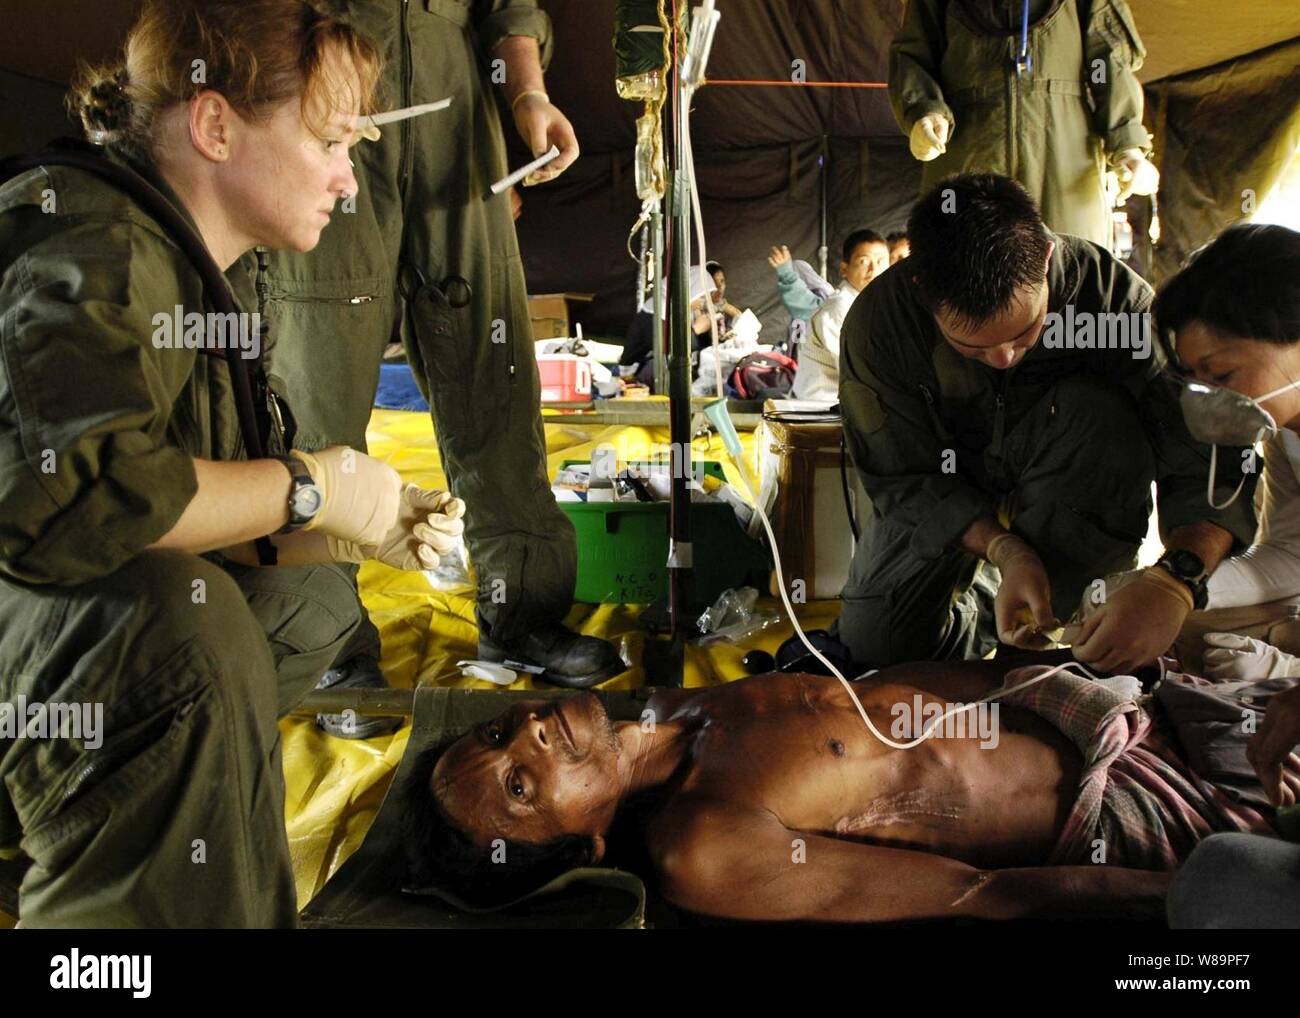 Navy Petty Officer 1st class Rebecca McClung (left) and Chief Petty Officer Jim Jones (right) tend to an injured Indonesian man who was medically evacuated from a coastal village on the island of Sumatra, Indonesia, on Jan. 3, 2005.  Medical teams from the aircraft carrier USS Abraham Lincoln (CVN 72) and the International Organization for Migration have set-up a triage site on Sultan Iskandar Muda Air Force Base, in Banda Aceh, Sumatra.  The two teams are working together with members of the Australian Air Force to provide initial medical care to victims of tsunami-stricken coastal regions. T Stock Photo